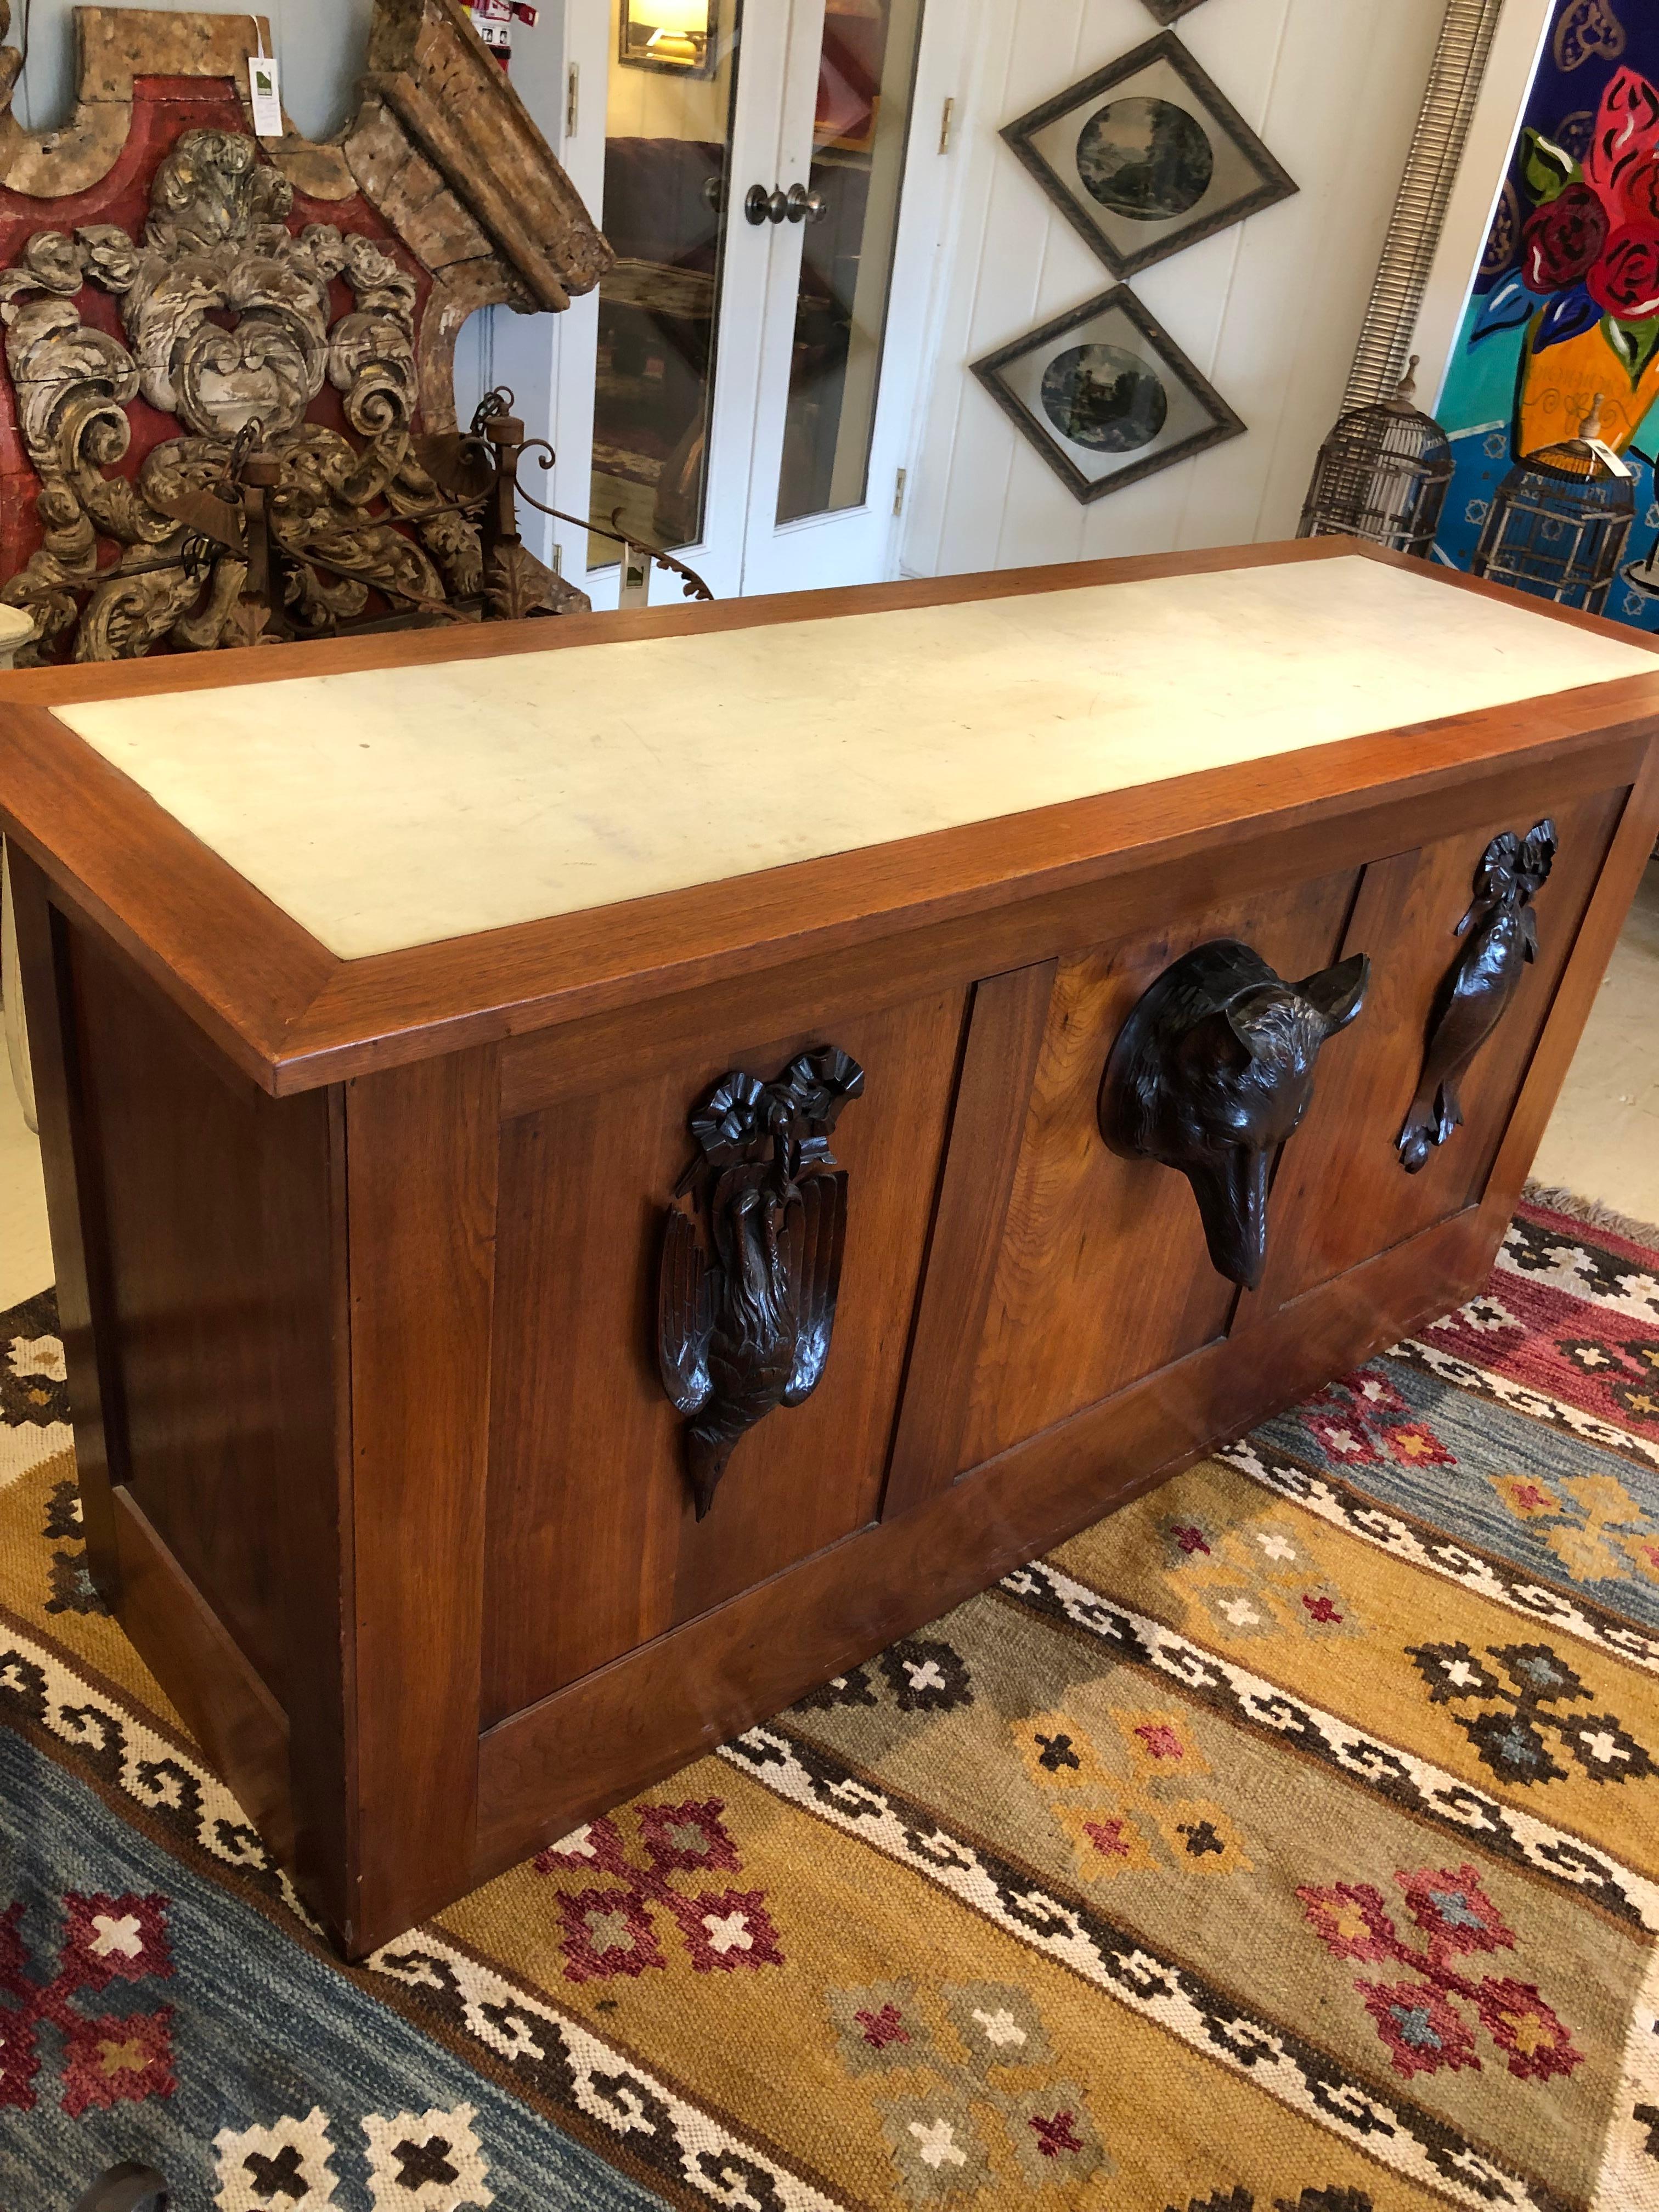 Extraordinary custom desk made of aged honey oak having two large drawers on each side with 3 smaller drawers in the top.  The narrower drawers have decorative carvings with oak leaves and branches.  The dark matte brass hardware complements the